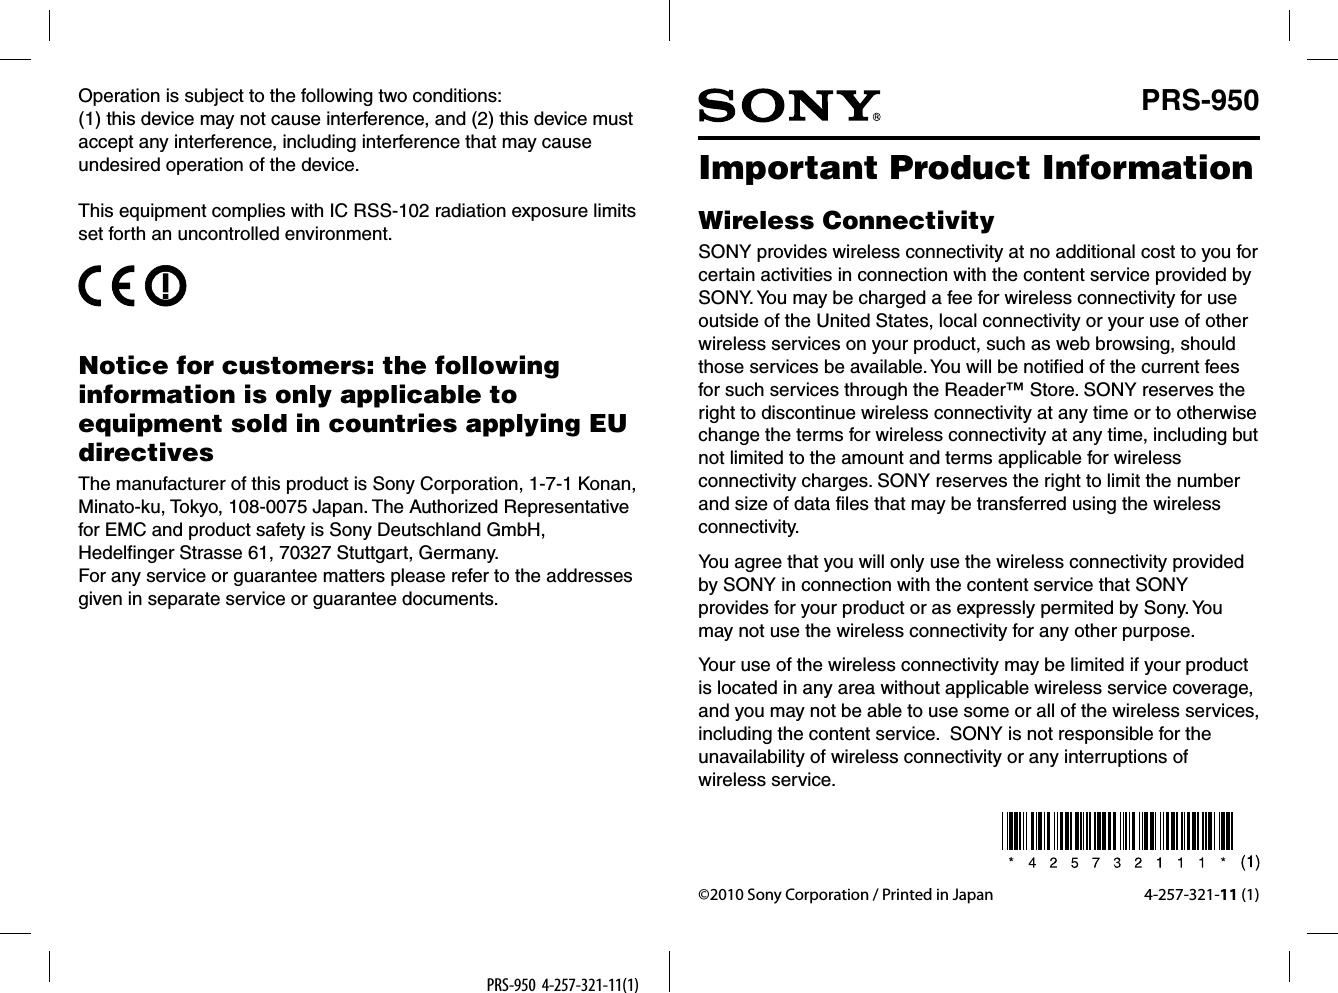 PRS-950  4-257-321-11(1) ©2010 Sony Corporation / Printed in Japan 4-257-321-11 (1)Important Product InformationWireless ConnectivitySONY provides wireless connectivity at no additional cost to you for certain activities in connection with the content service provided by SONY. You may be charged a fee for wireless connectivity for use outside of the United States, local connectivity or your use of other wireless services on your product, such as web browsing, should those services be available. You will be notified of the current fees for such services through the Reader™ Store. SONY reserves the right to discontinue wireless connectivity at any time or to otherwise change the terms for wireless connectivity at any time, including but not limited to the amount and terms applicable for wireless connectivity charges. SONY reserves the right to limit the number and size of data files that may be transferred using the wireless connectivity.You agree that you will only use the wireless connectivity provided by SONY in connection with the content service that SONY provides for your product or as expressly permited by Sony. You may not use the wireless connectivity for any other purpose.Your use of the wireless connectivity may be limited if your product is located in any area without applicable wireless service coverage, and you may not be able to use some or all of the wireless services, including the content service.  SONY is not responsible for the unavailability of wireless connectivity or any interruptions of wireless service.PRS-950Operation is subject to the following two conditions:(1) this device may not cause interference, and (2) this device must accept any interference, including interference that may cause undesired operation of the device.This equipment complies with IC RSS-102 radiation exposure limits set forth an uncontrolled environment.Notice for customers: the following information is only applicable to equipment sold in countries applying EU directivesThe manufacturer of this product is Sony Corporation, 1-7-1 Konan, Minato-ku, Tokyo, 108-0075 Japan. The Authorized Representative for EMC and product safety is Sony Deutschland GmbH, Hedelfinger Strasse 61, 70327 Stuttgart, Germany.For any service or guarantee matters please refer to the addresses given in separate service or guarantee documents.